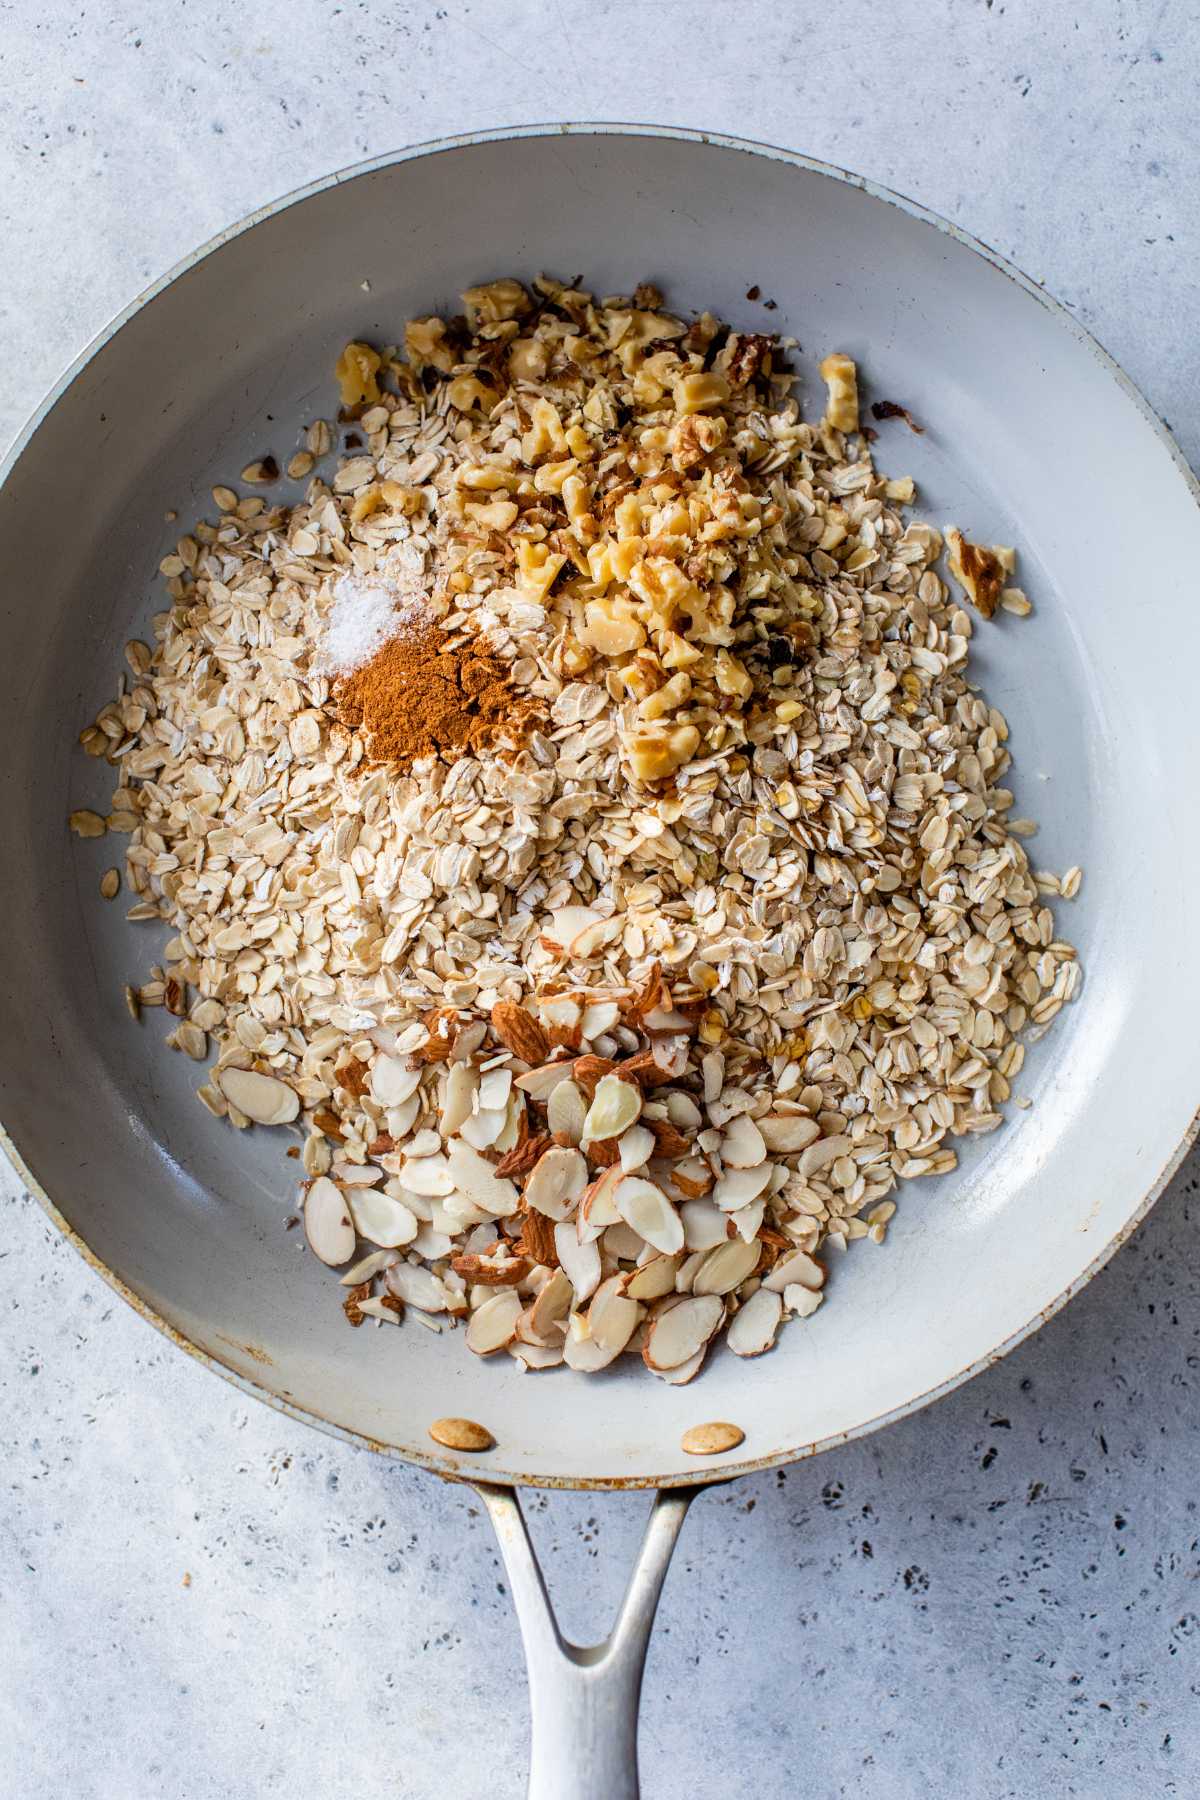 Sliced almonds, rolled oats, cinnamon, salt and walnuts added to a skillet.